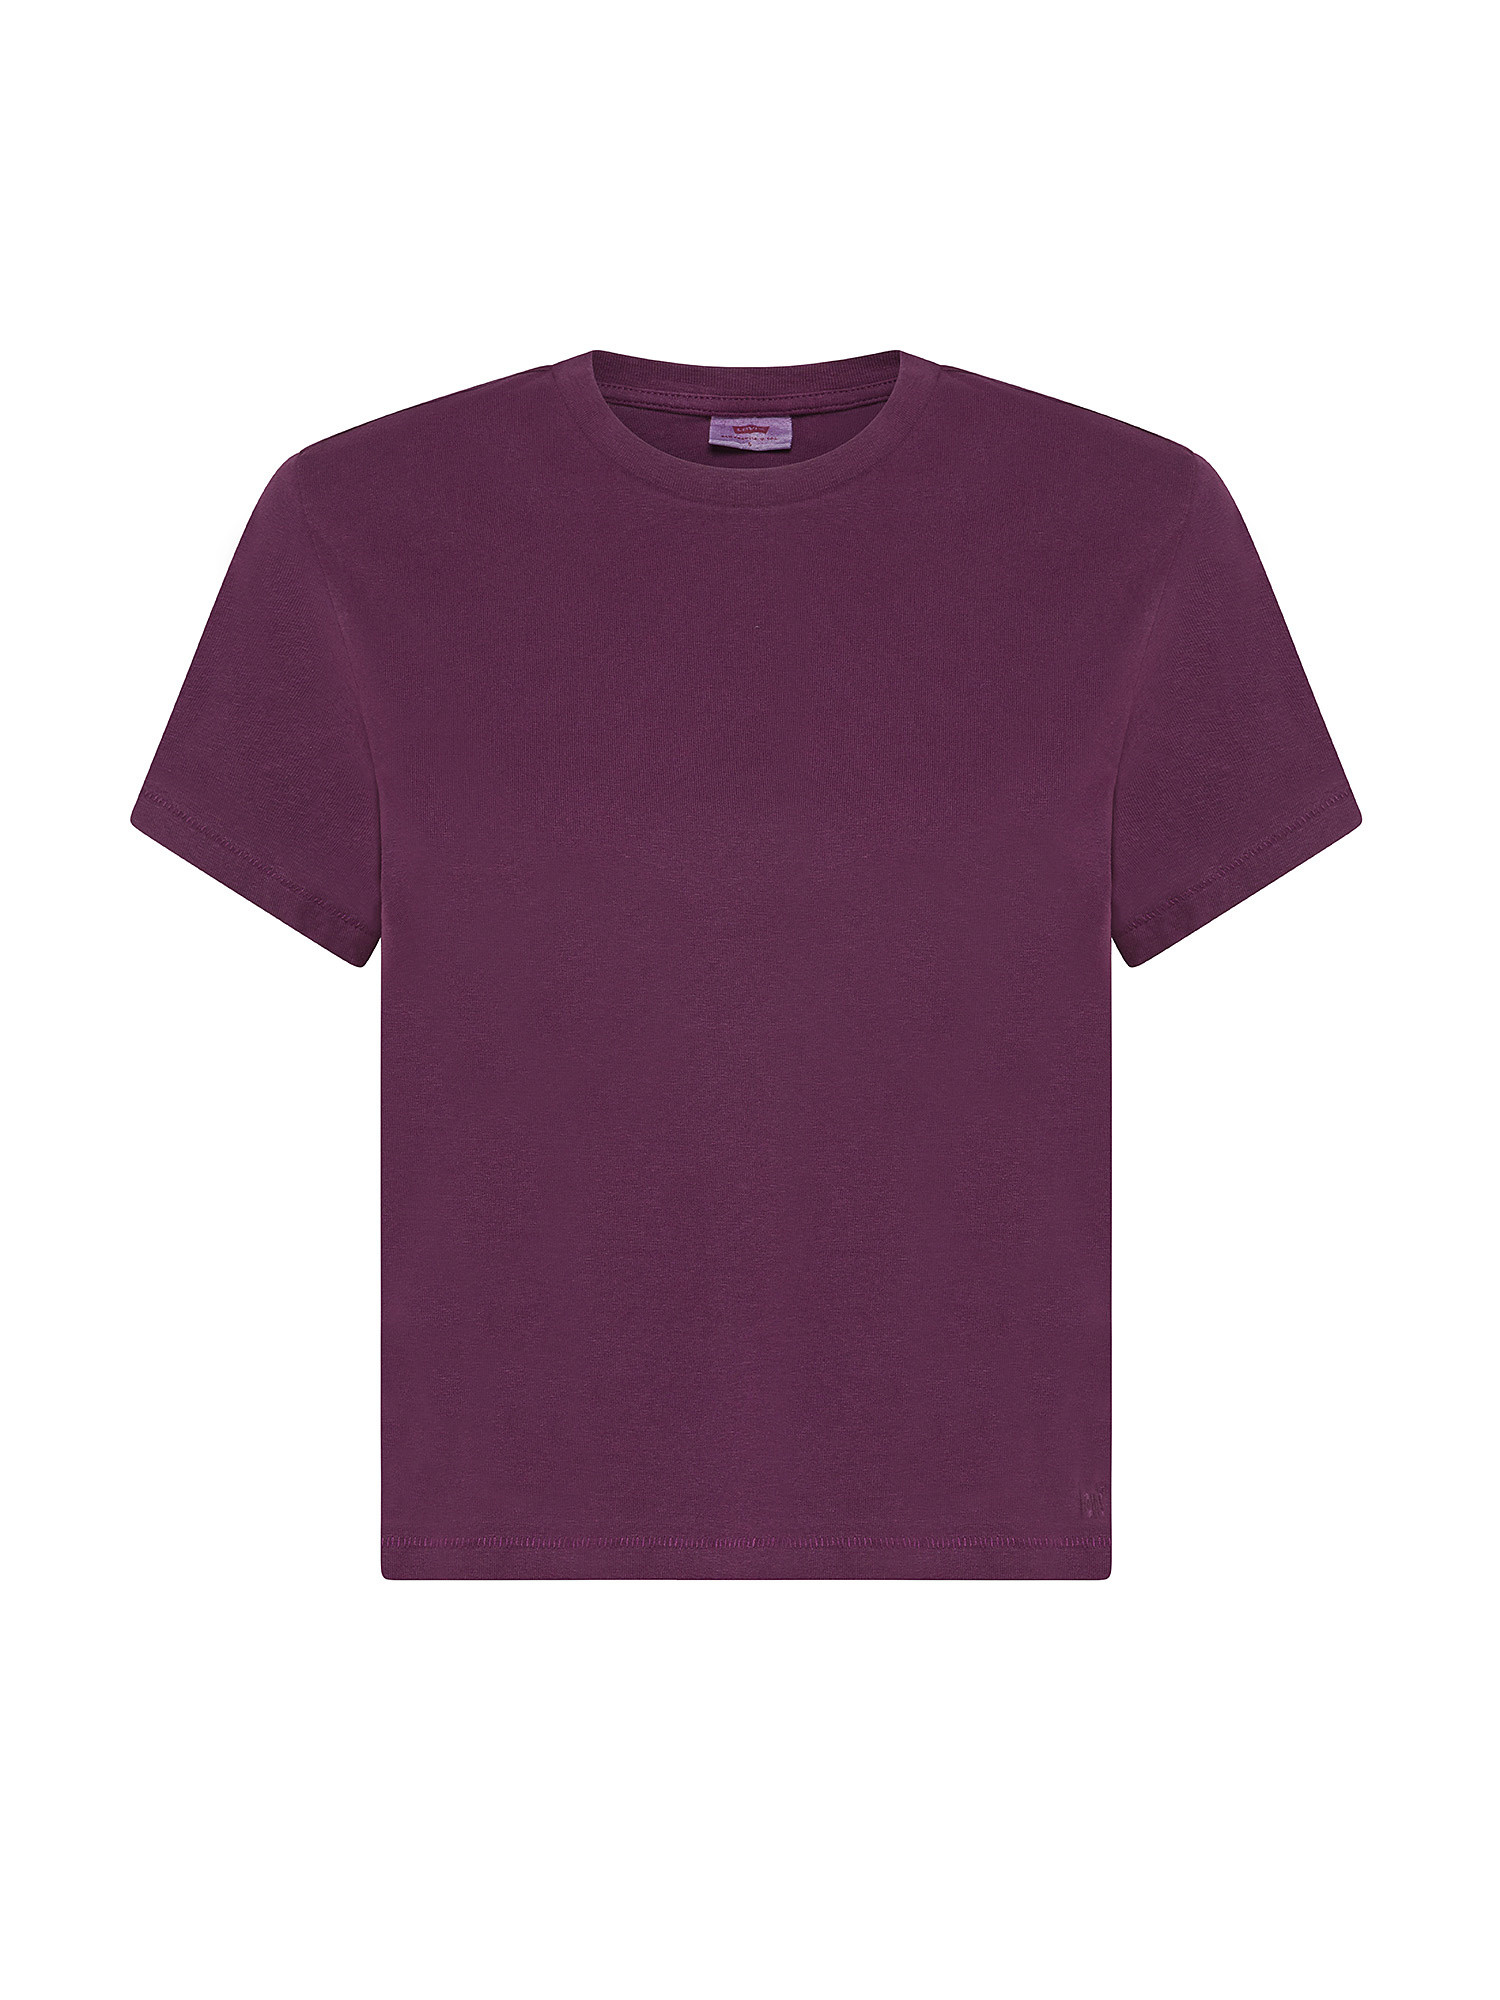 Levi's - T-shirt in cotone, Rosso bordeaux, large image number 0